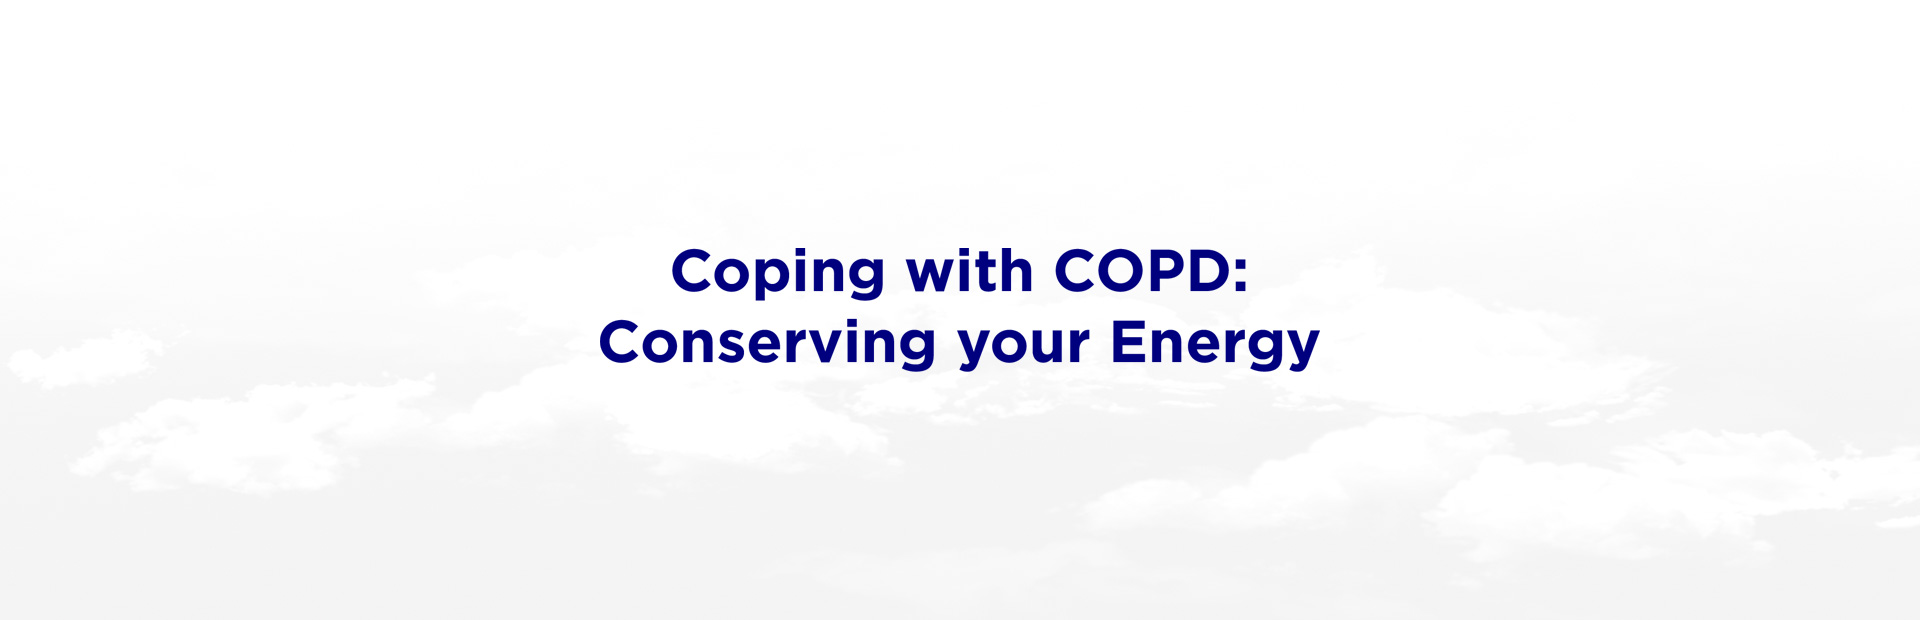 Coping with COPD: Conserving your Energy